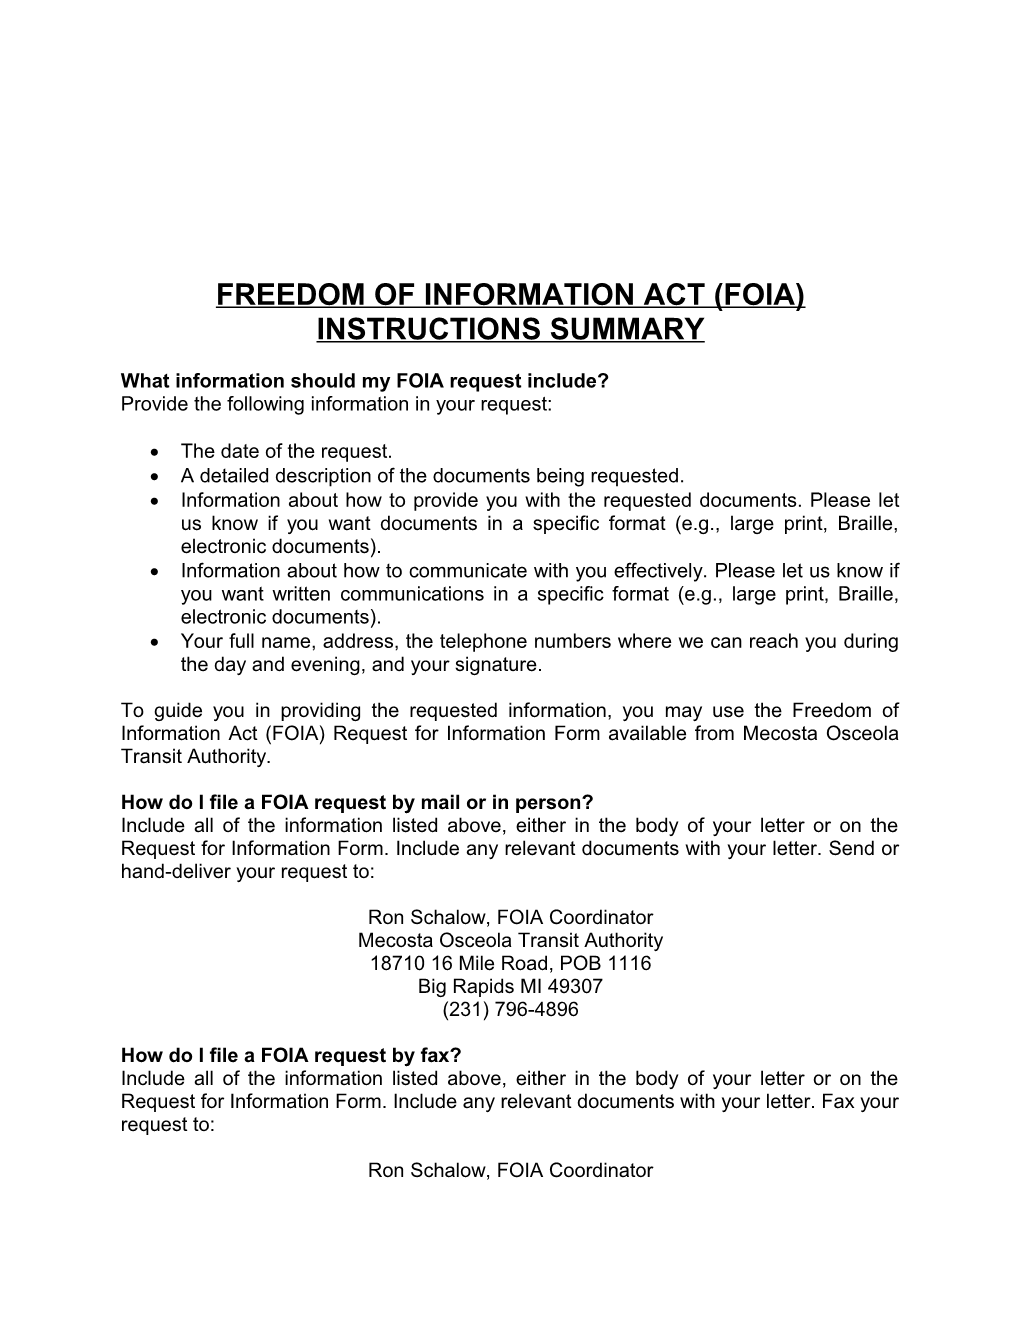 Freedom of Information Act (Foia) Instructions Summary